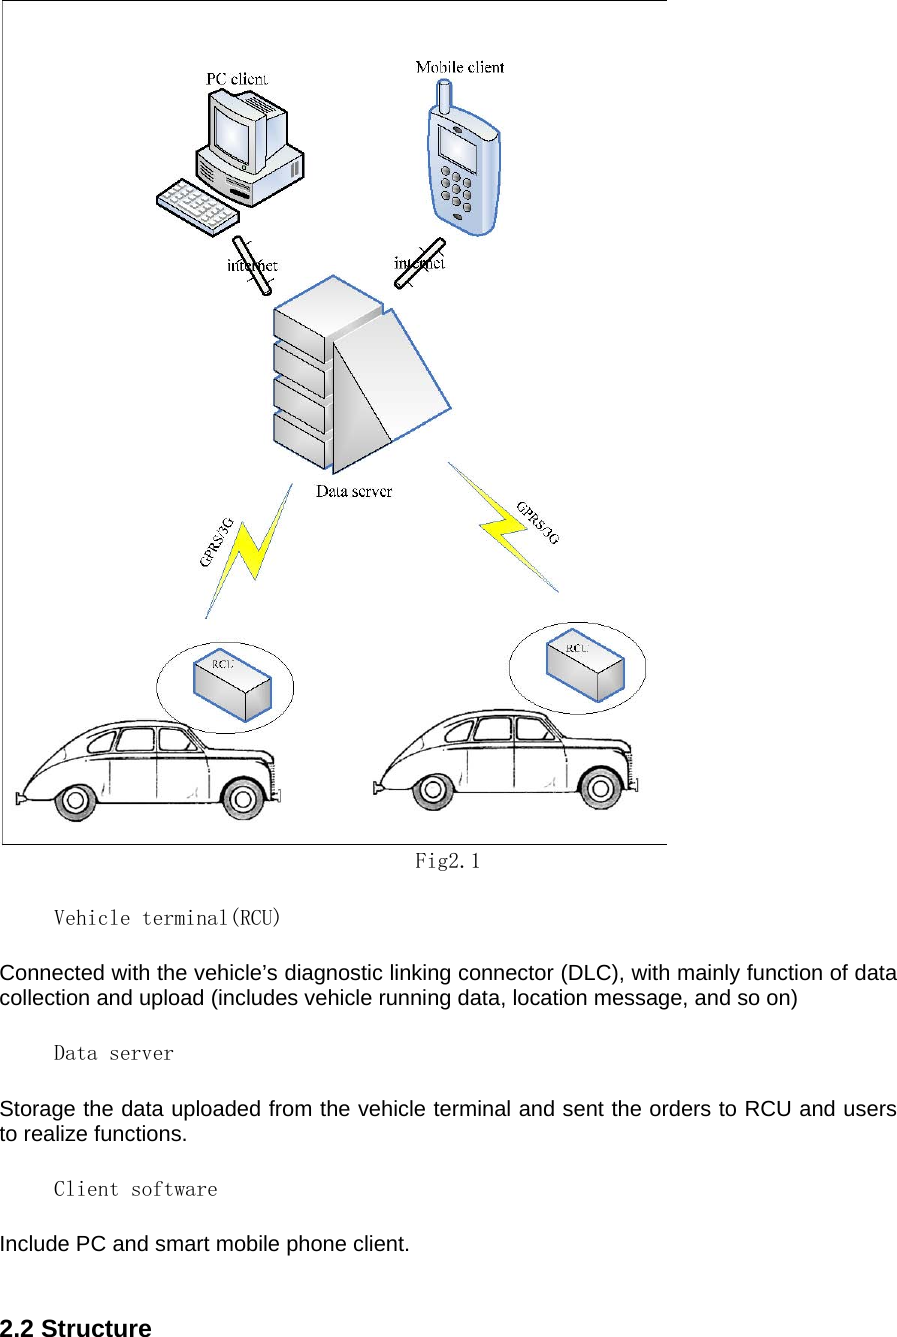   Fig2.1       Vehicle terminal(RCU)   Connected with the vehicle’s diagnostic linking connector (DLC), with mainly function of data collection and upload (includes vehicle running data, location message, and so on)       Data server    Storage the data uploaded from the vehicle terminal and sent the orders to RCU and users to realize functions.         Client software   Include PC and smart mobile phone client.    2.2 Structure     